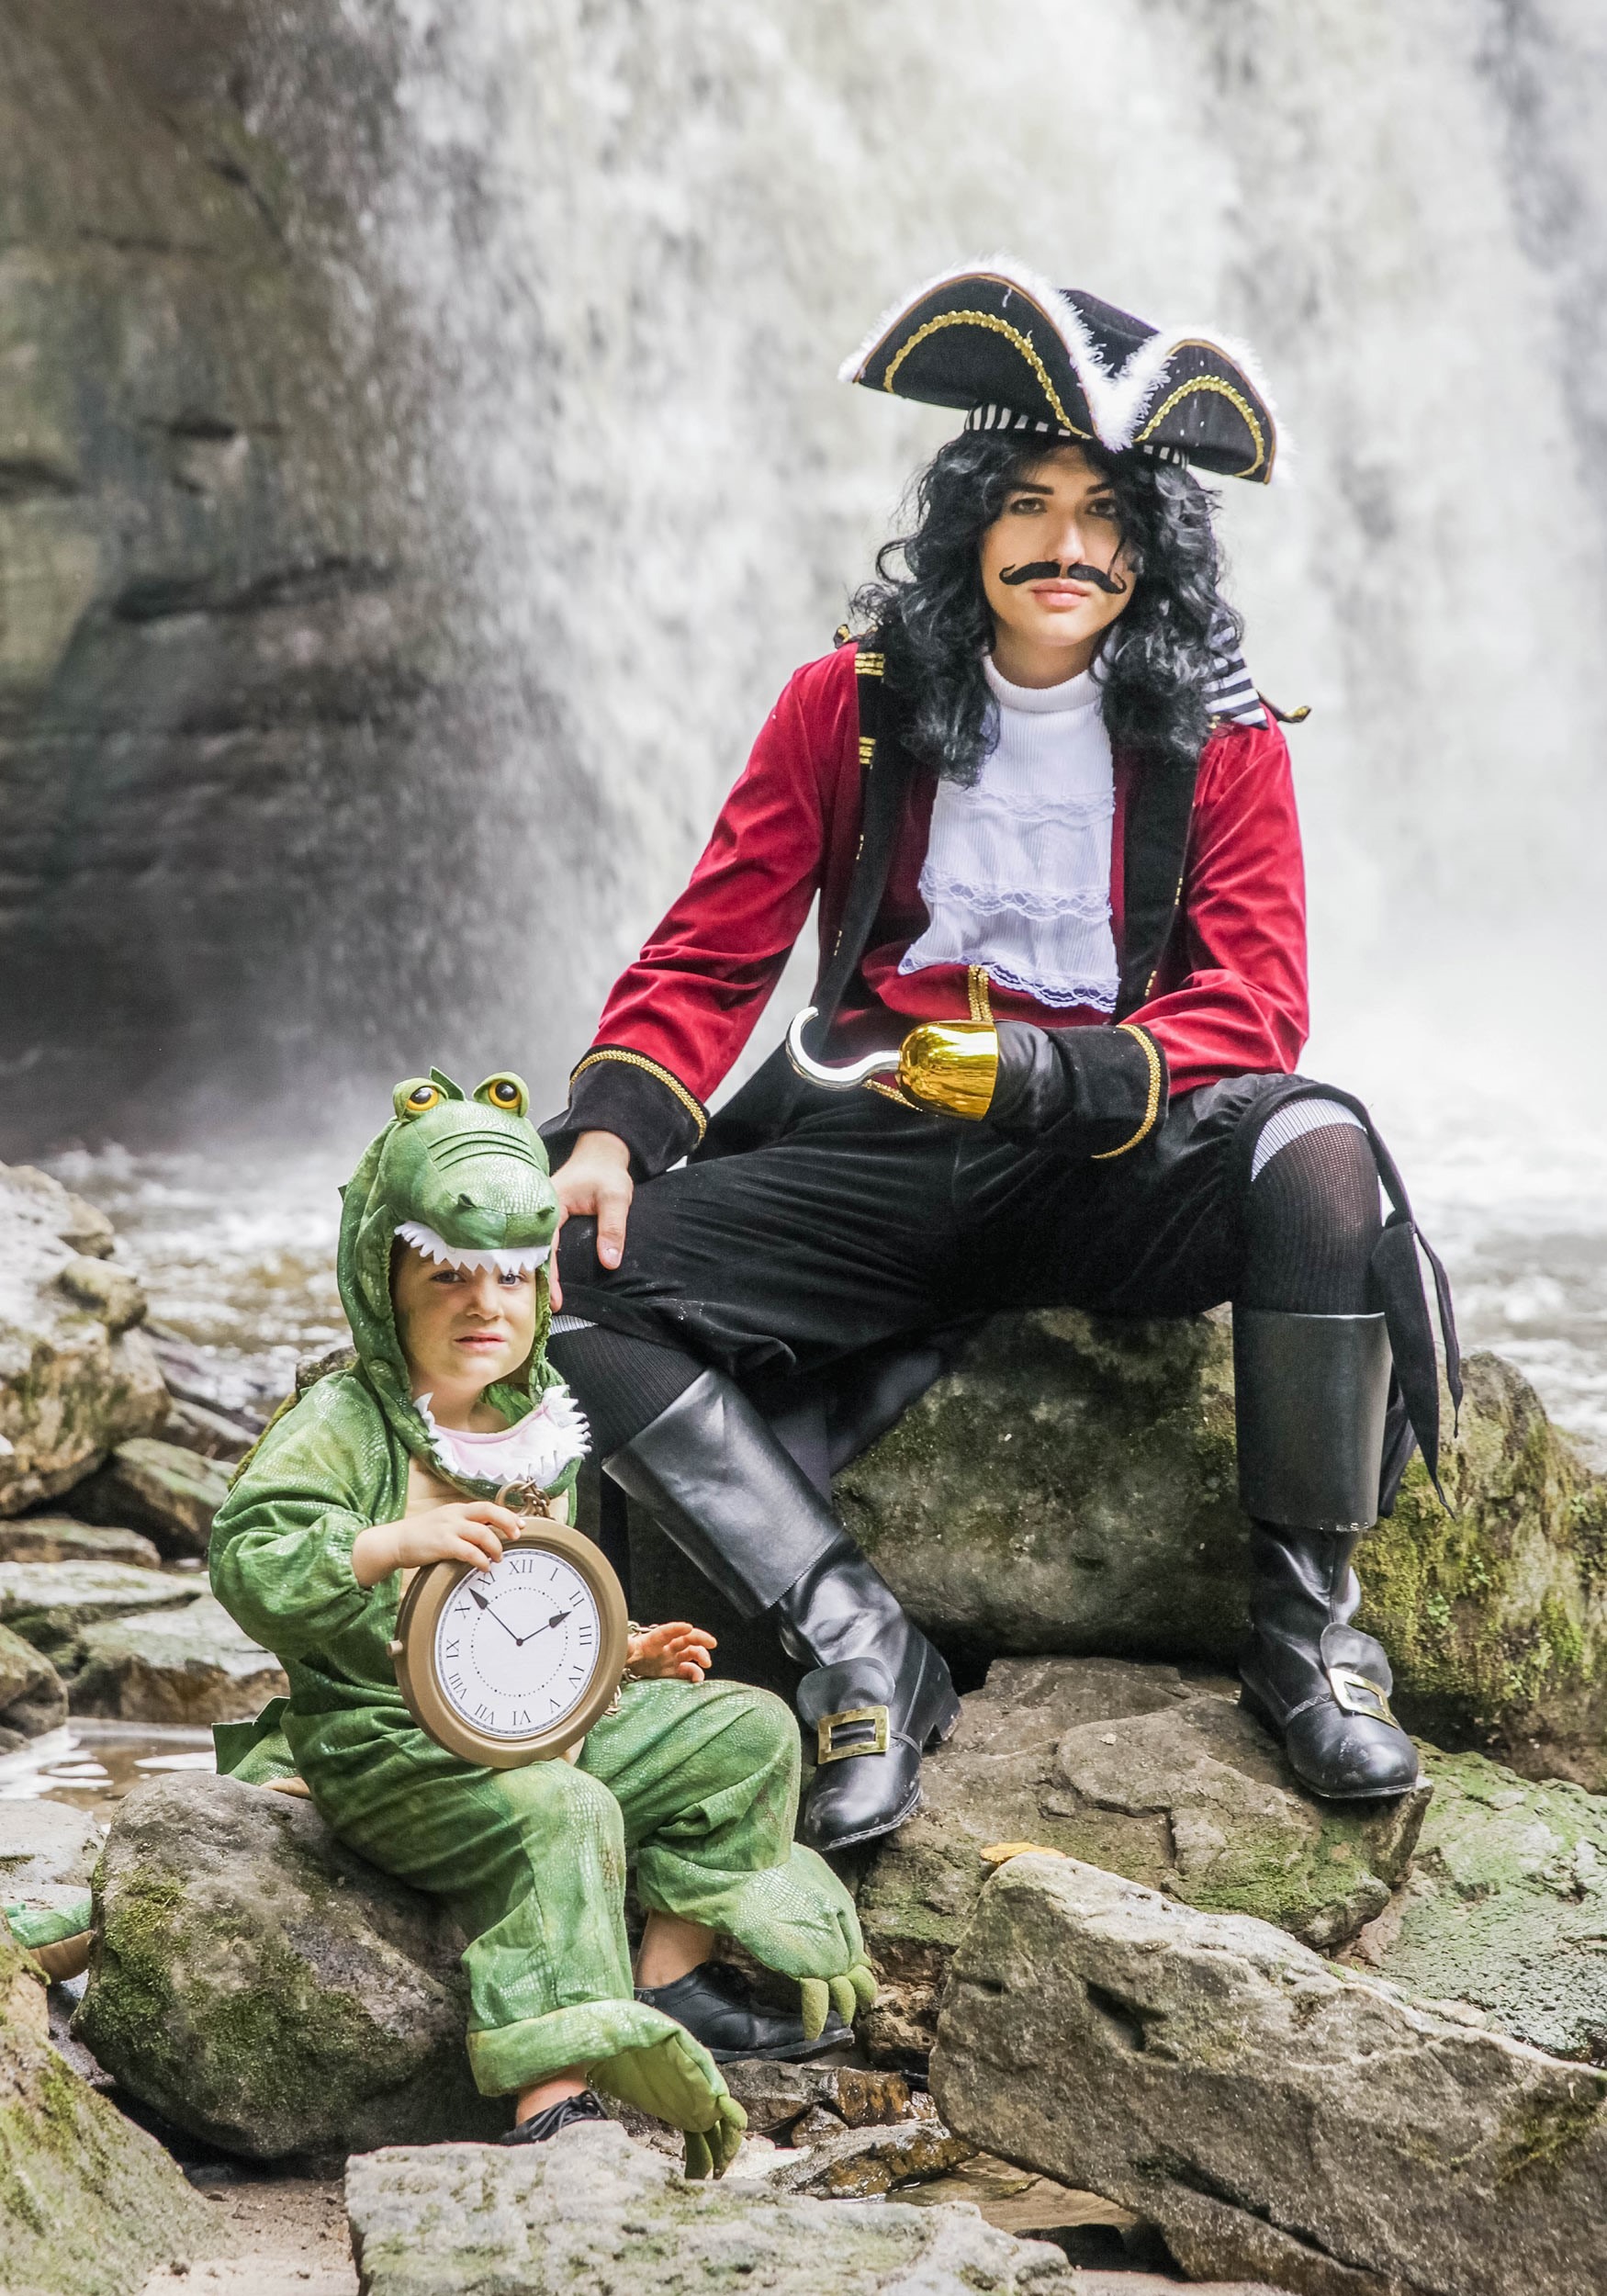 Deluxe Captain Hook Costume for Adults